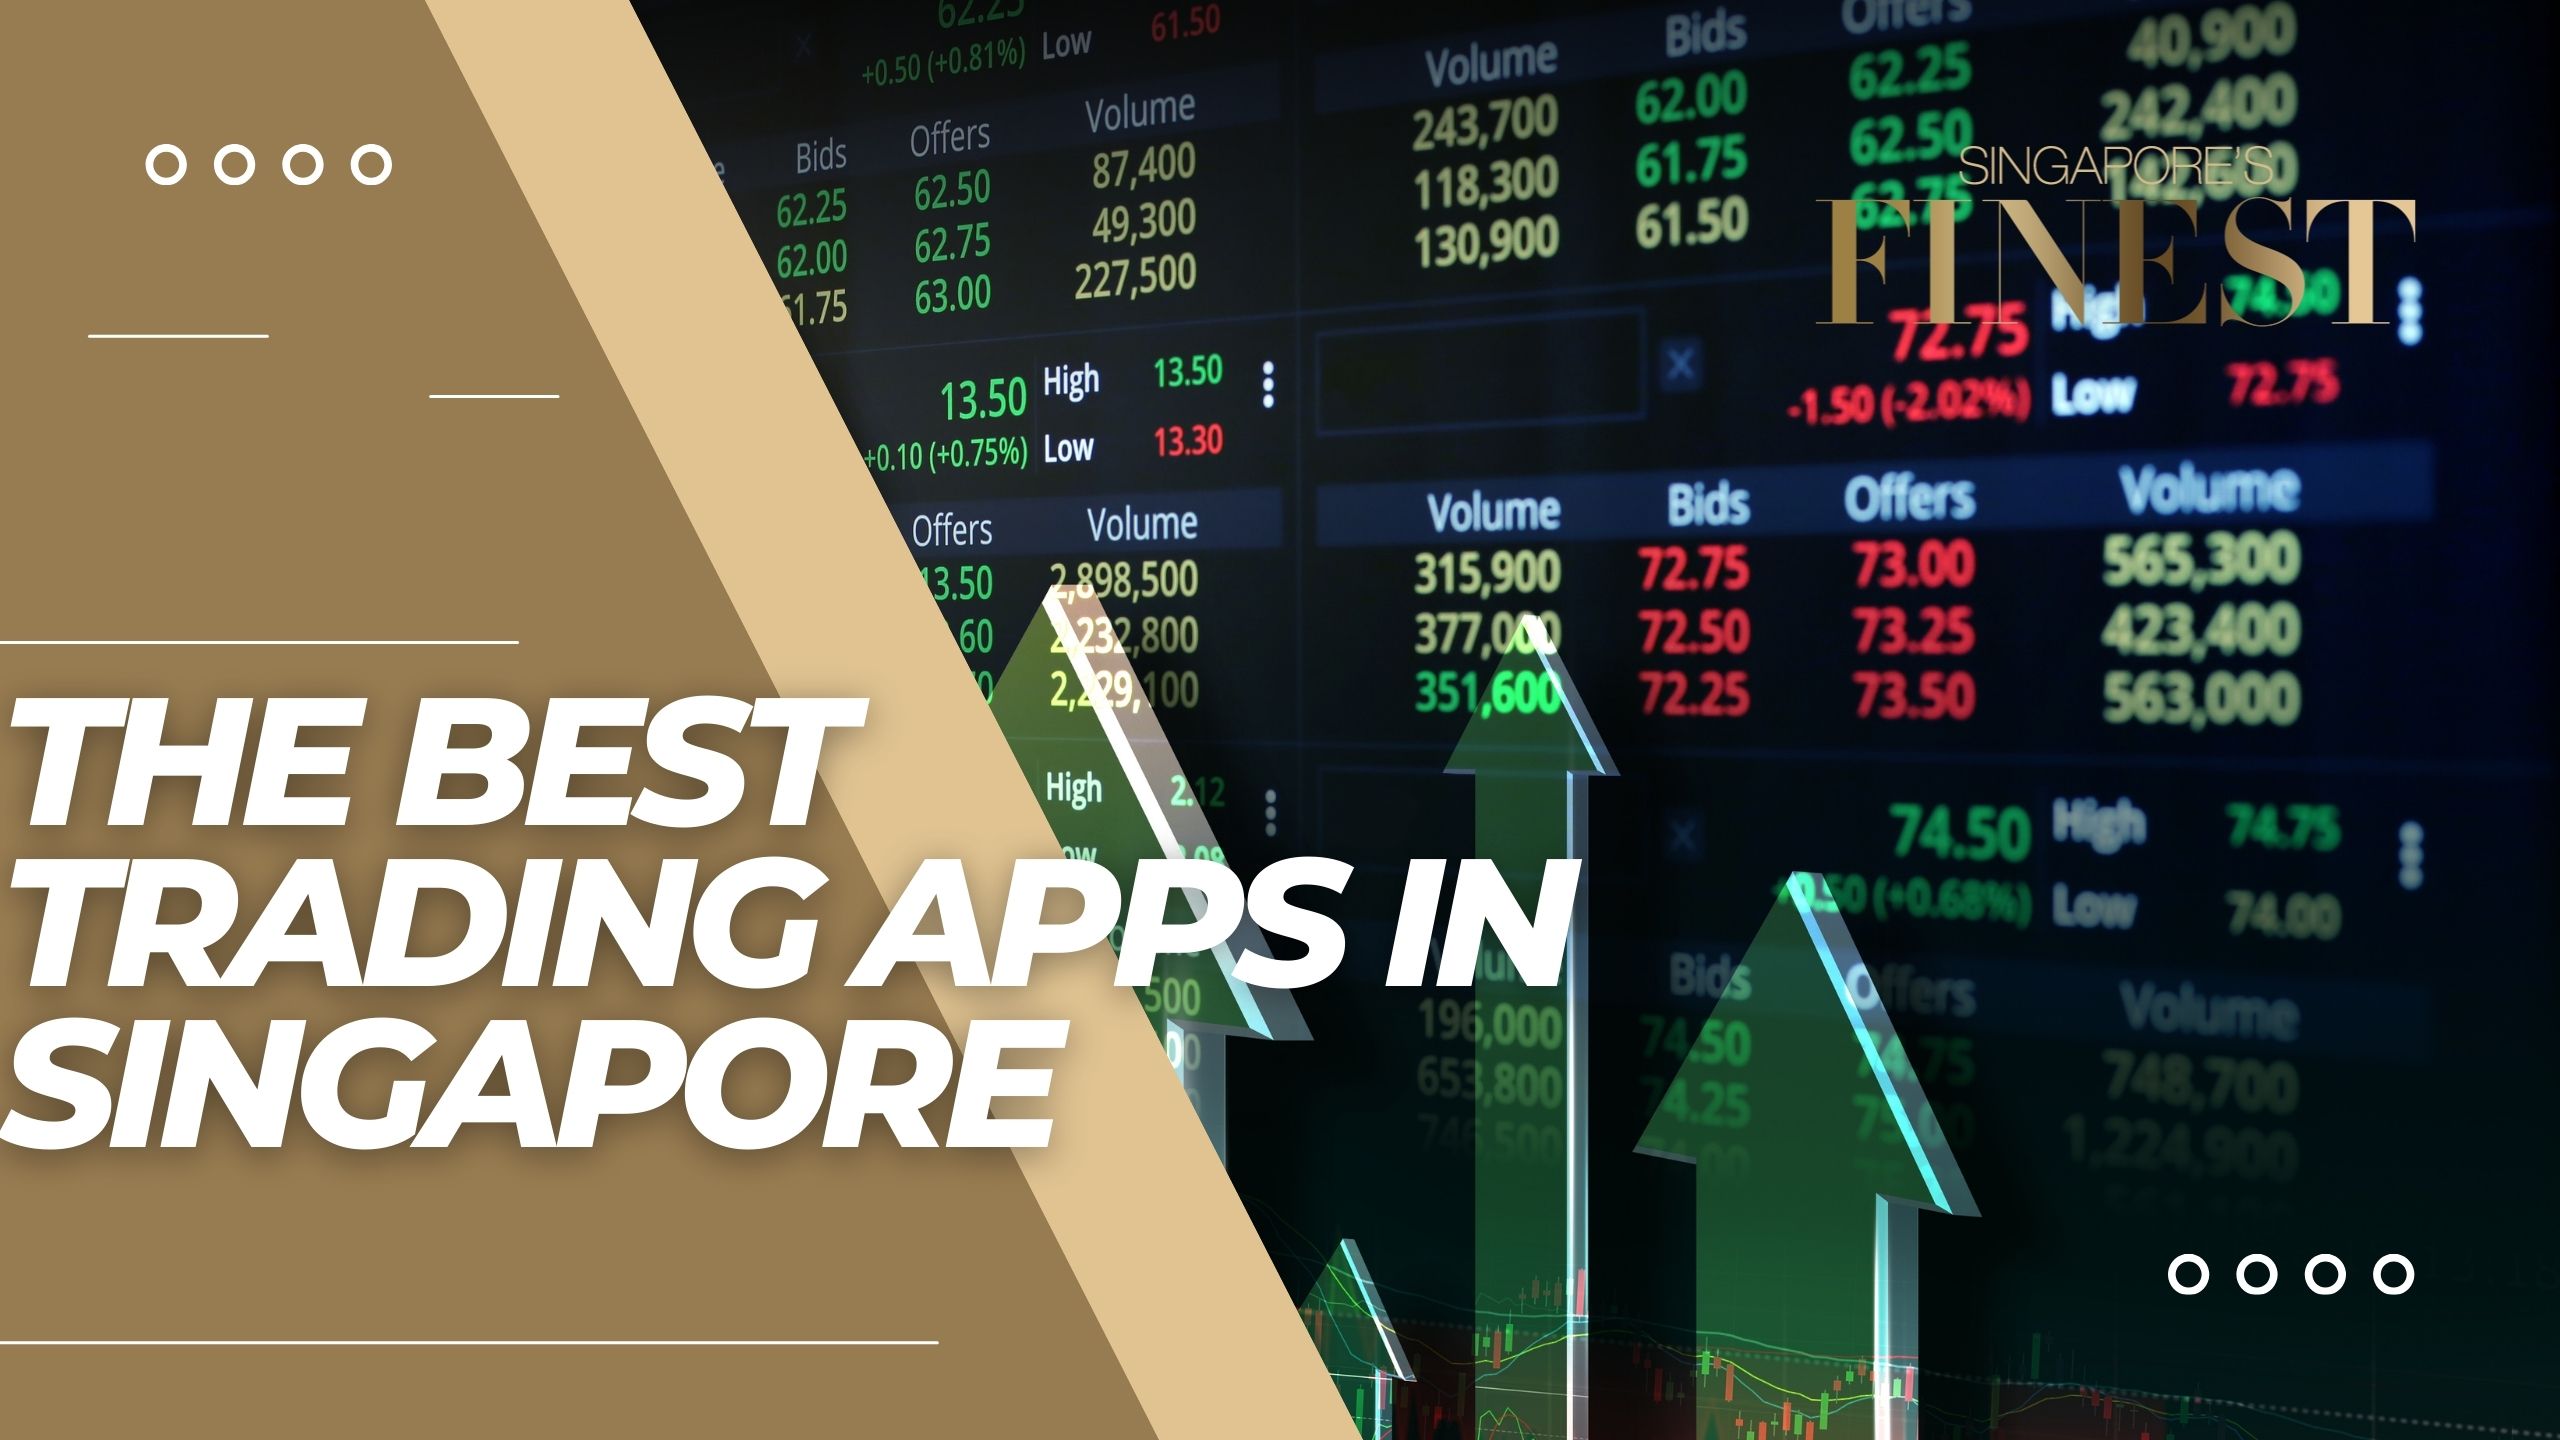 The Finest Trading Apps in Singapore